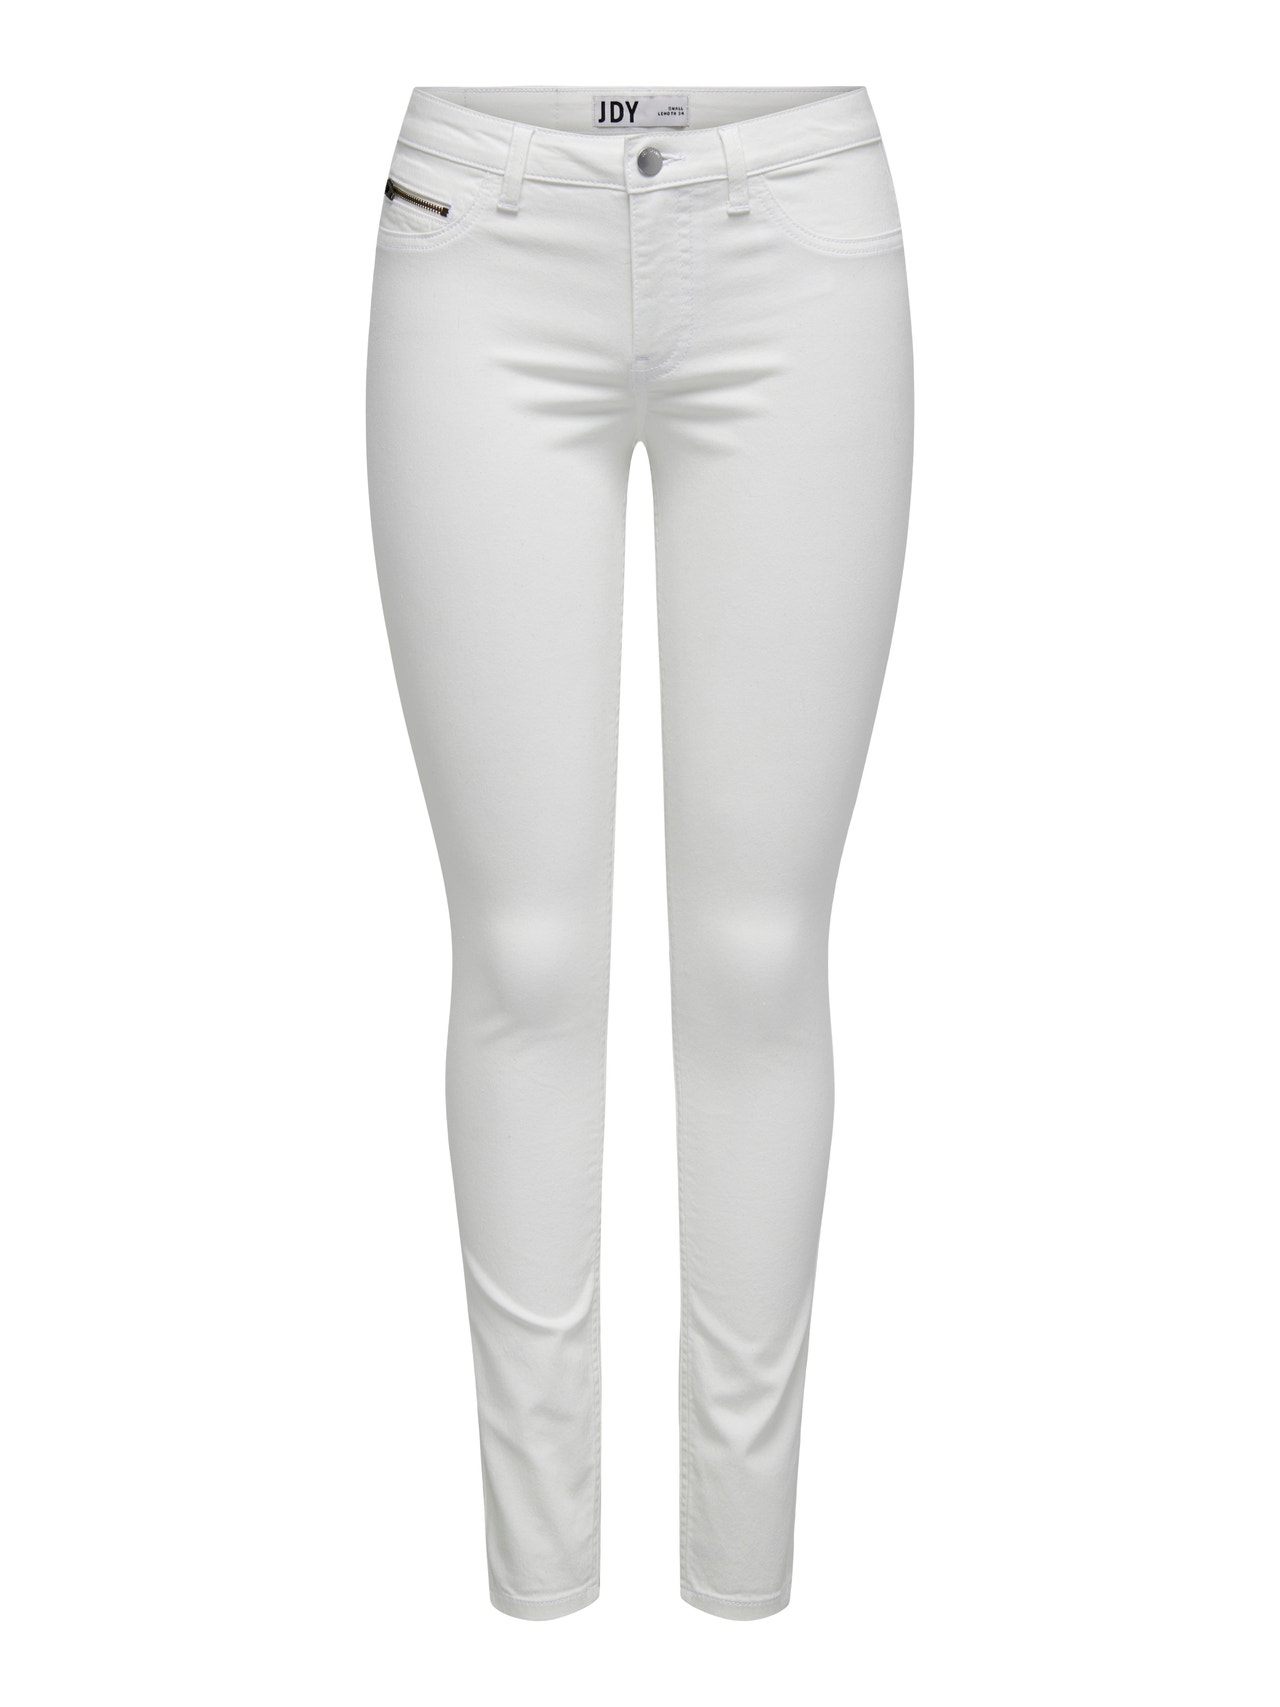 ONLY Jeans Skinny Fit Taille classique -White - 15271705